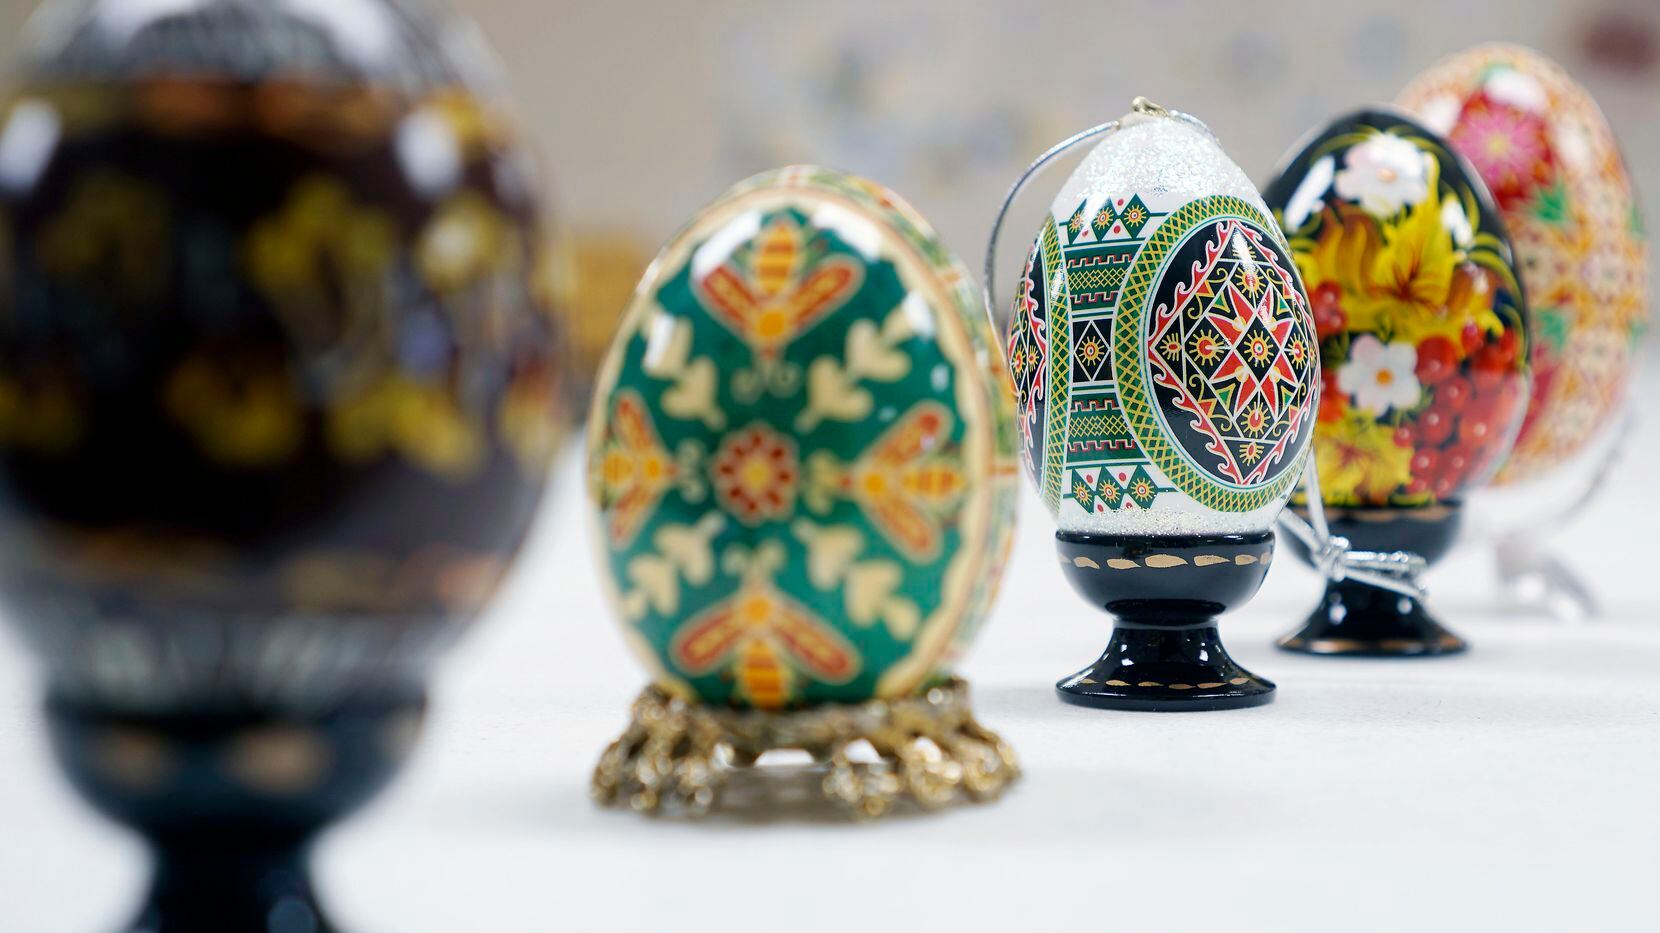 Pysanky, or traditional Ukrainian Easter eggs, were on display and for sale during Palm...